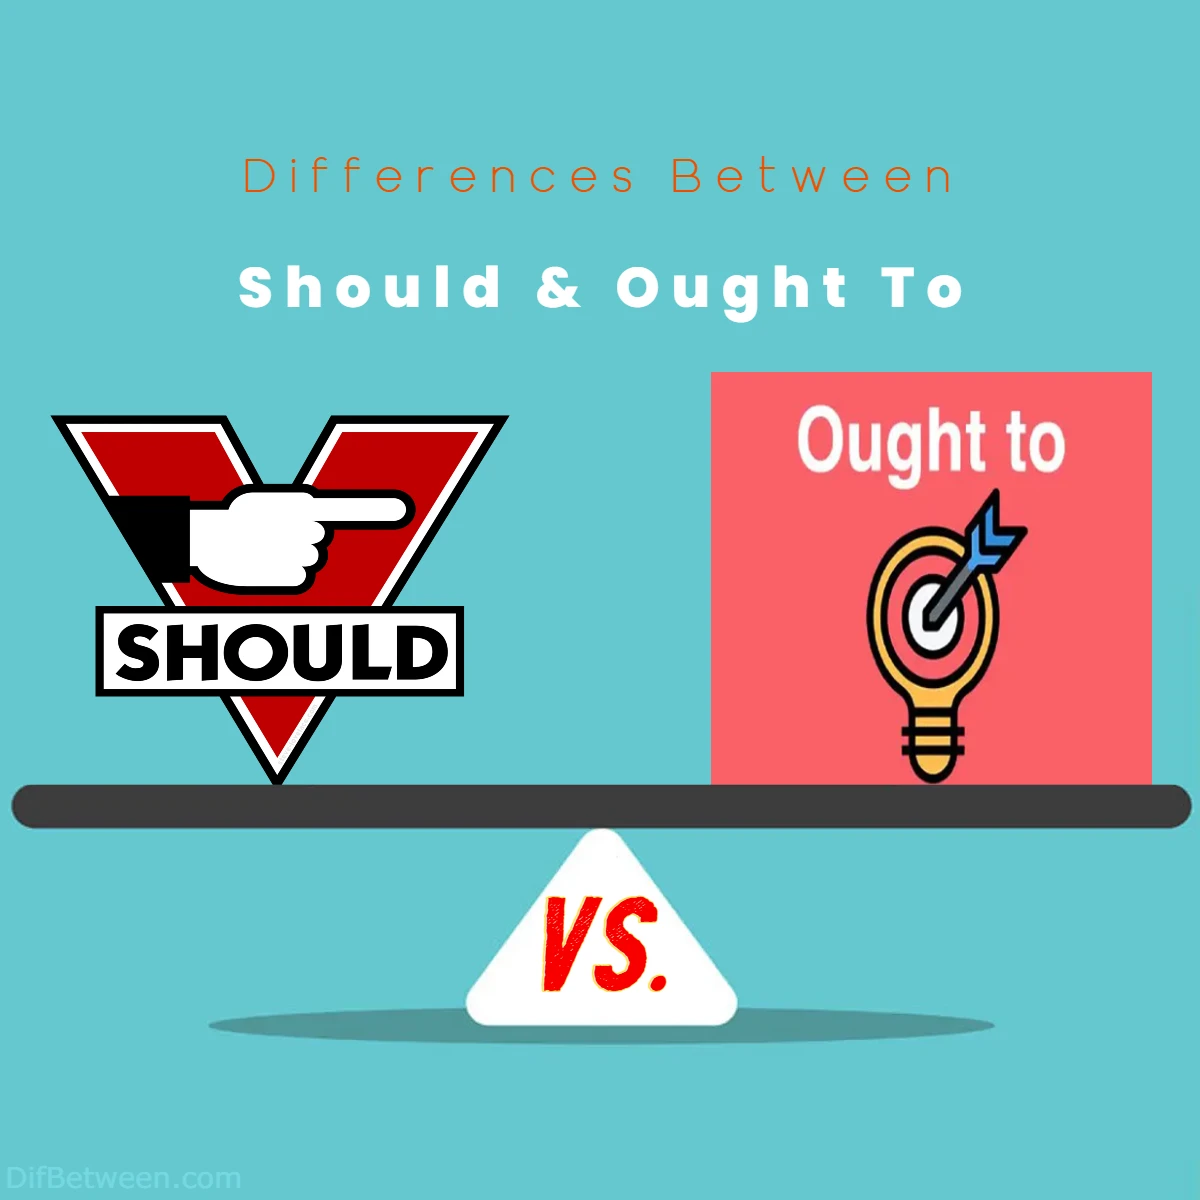 Differences Between Should vs Ought To